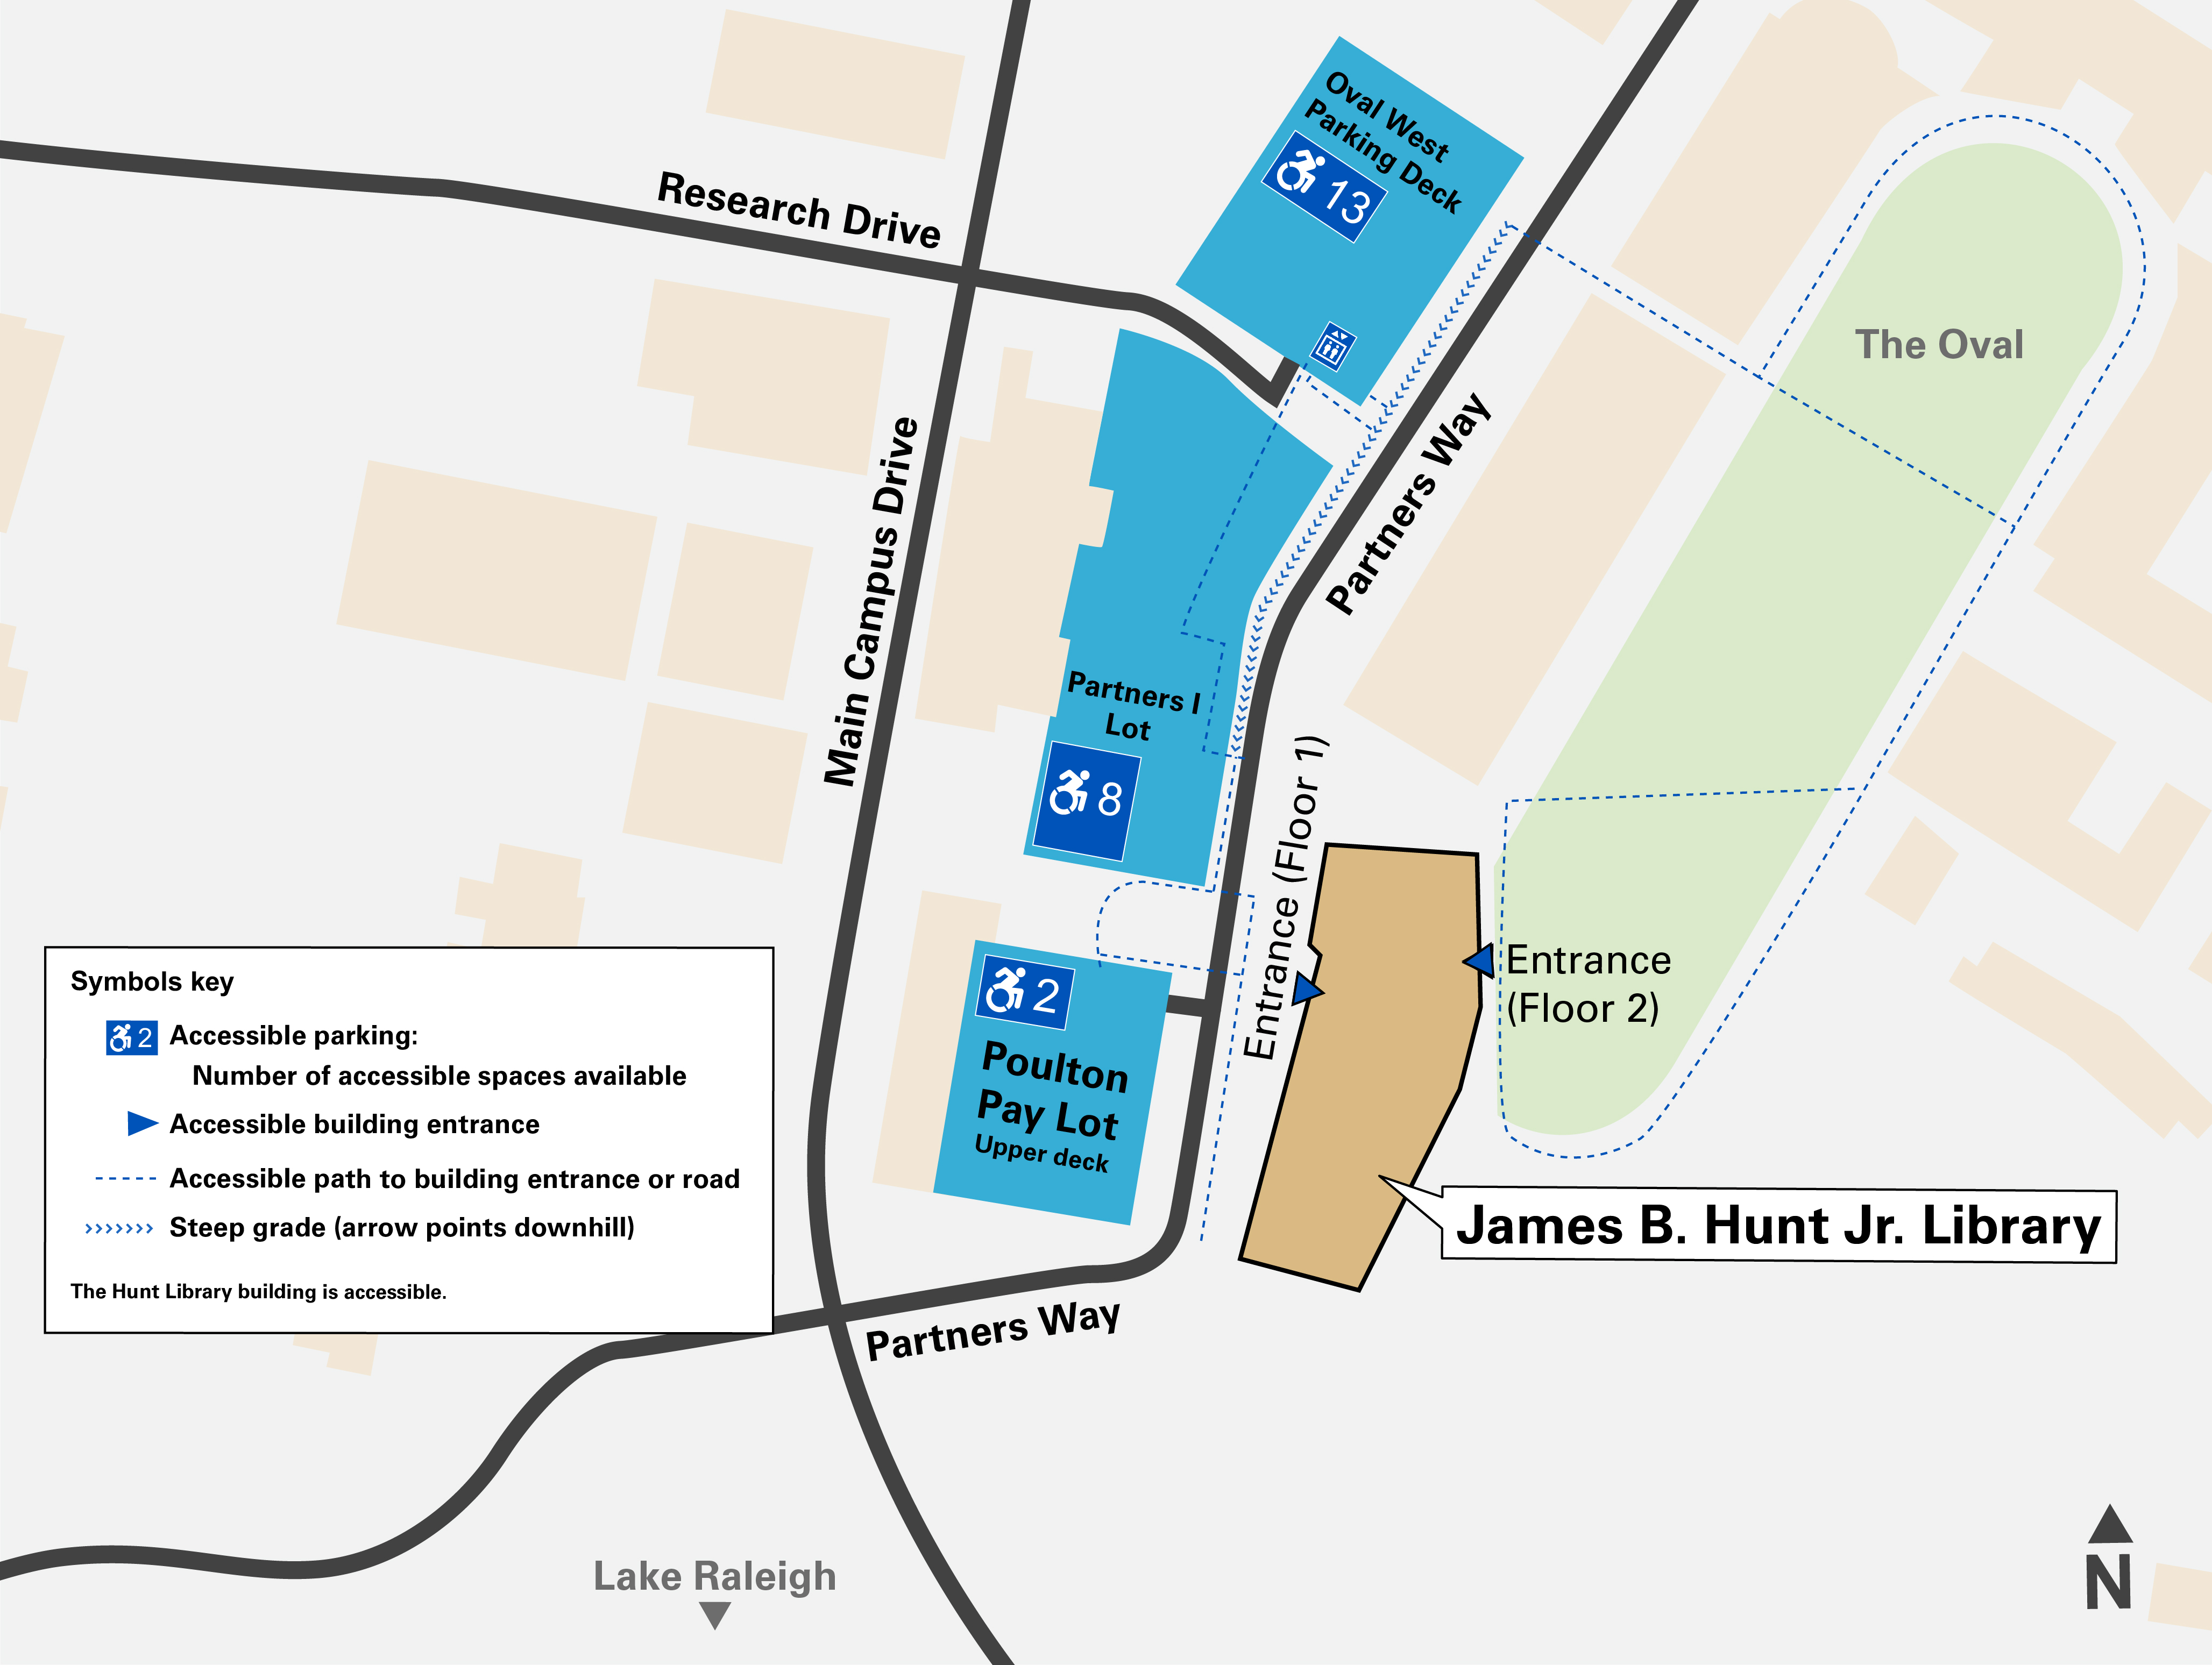 Map of Hunt Library on Partners Way. To the west, Poulton pay lot has 2 accessible spaces available. Just north of that, the Partners 1 Lot has 8 accessible spaces available, and north of that the Oval West parking deck has 13 accessible spaces. There is a steep grade from the Oval West parking deck down to Partners 1 Lot on Partners Way. A more accessible path to the library cuts through the Partners 1 lot, or alternatively crosses Partners Way and cuts through The Oval.